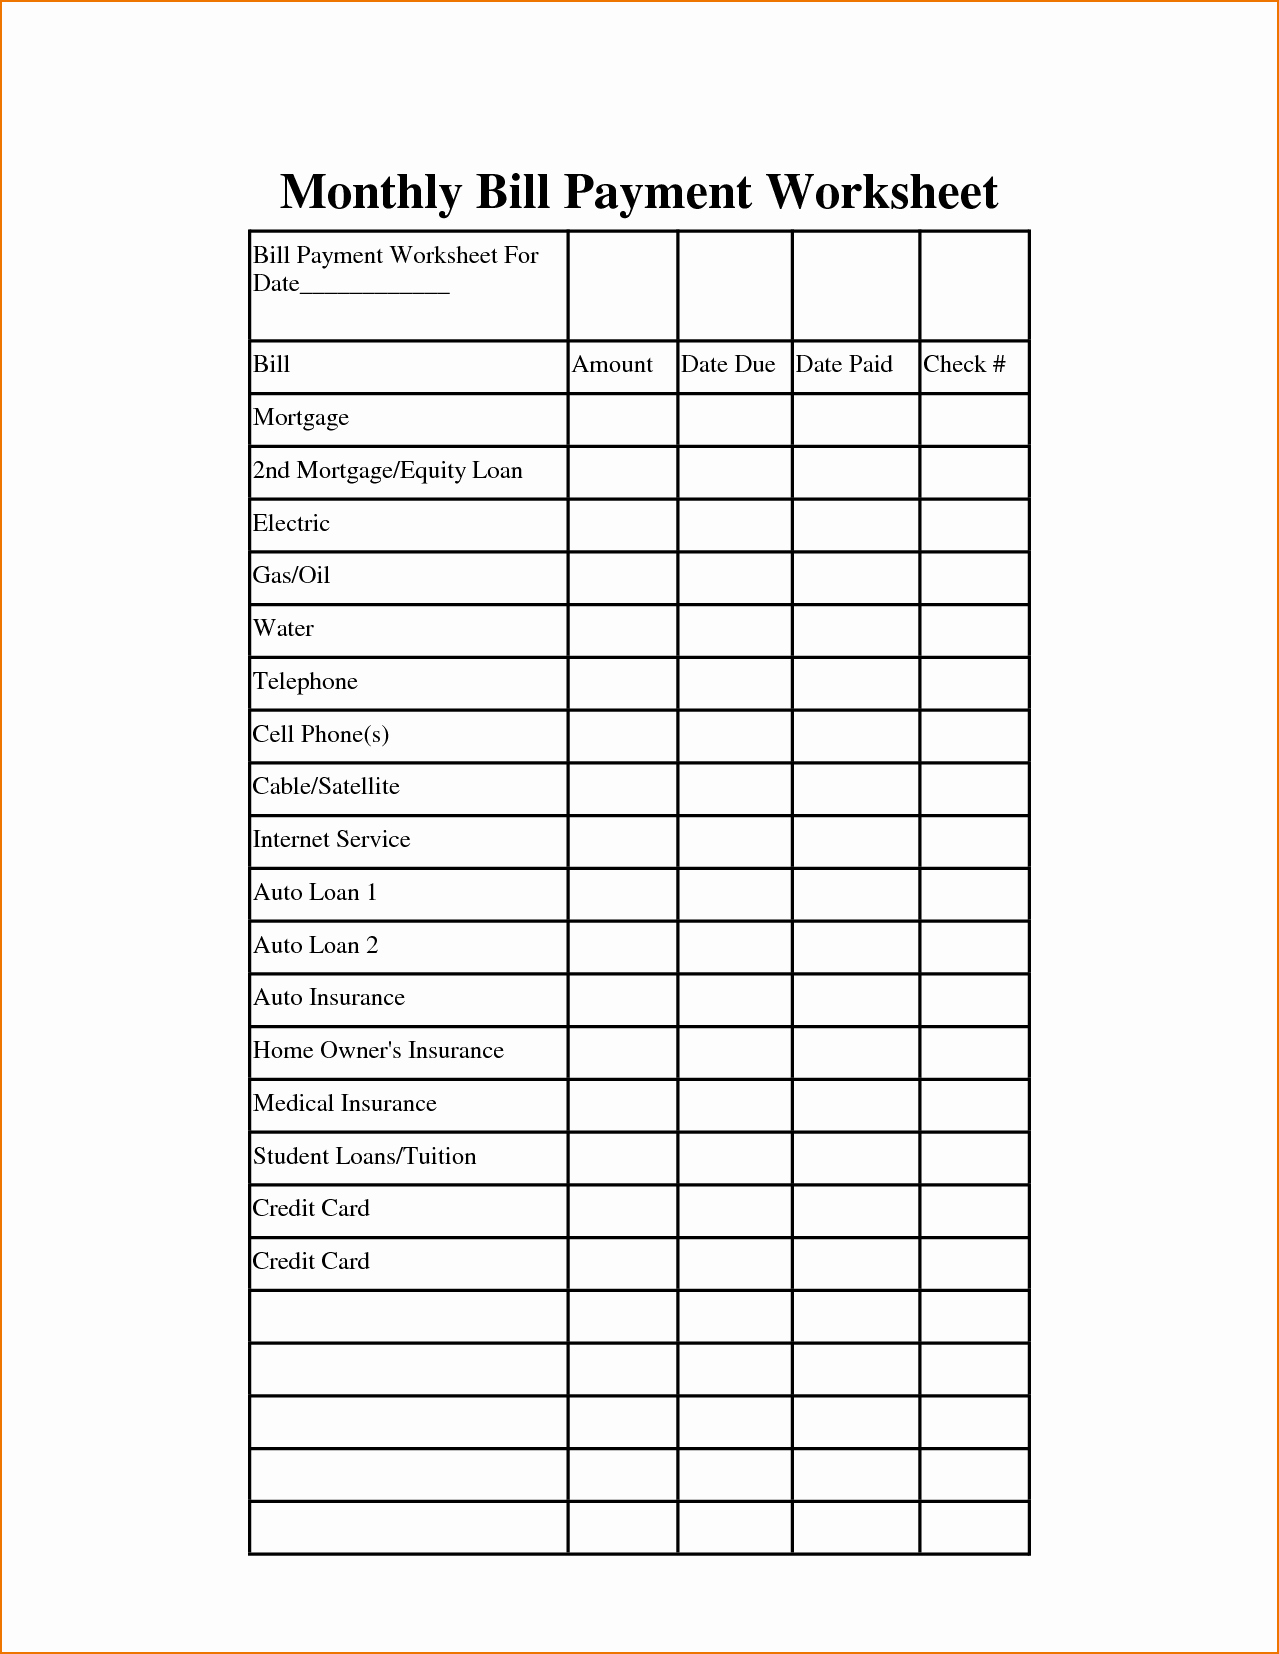 Monthaly Bill organizer Template Excel – Spreadsheets